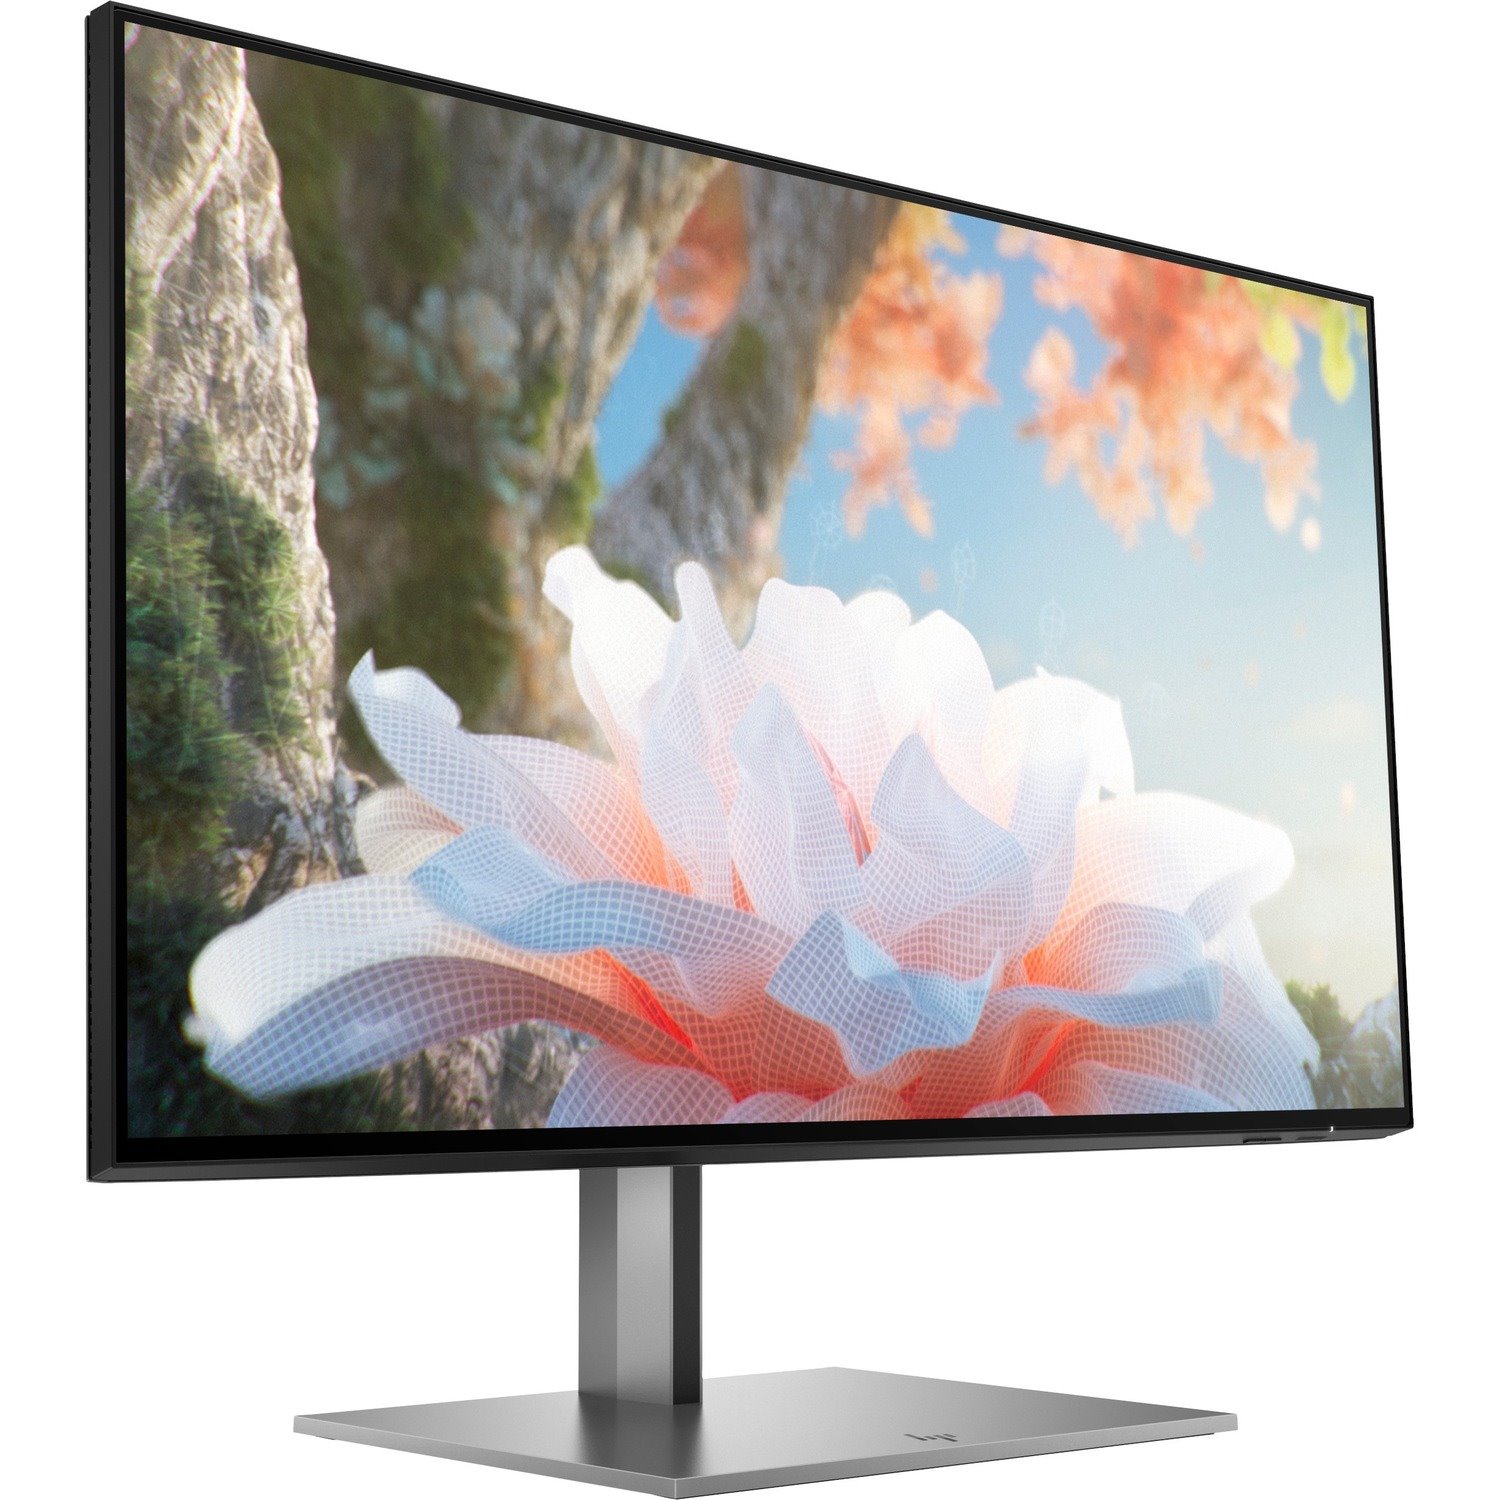 HP DreamColor Z27xs G3 68.6 cm (27") 4K UHD LCD Monitor - 16:9 - Turbo Silver